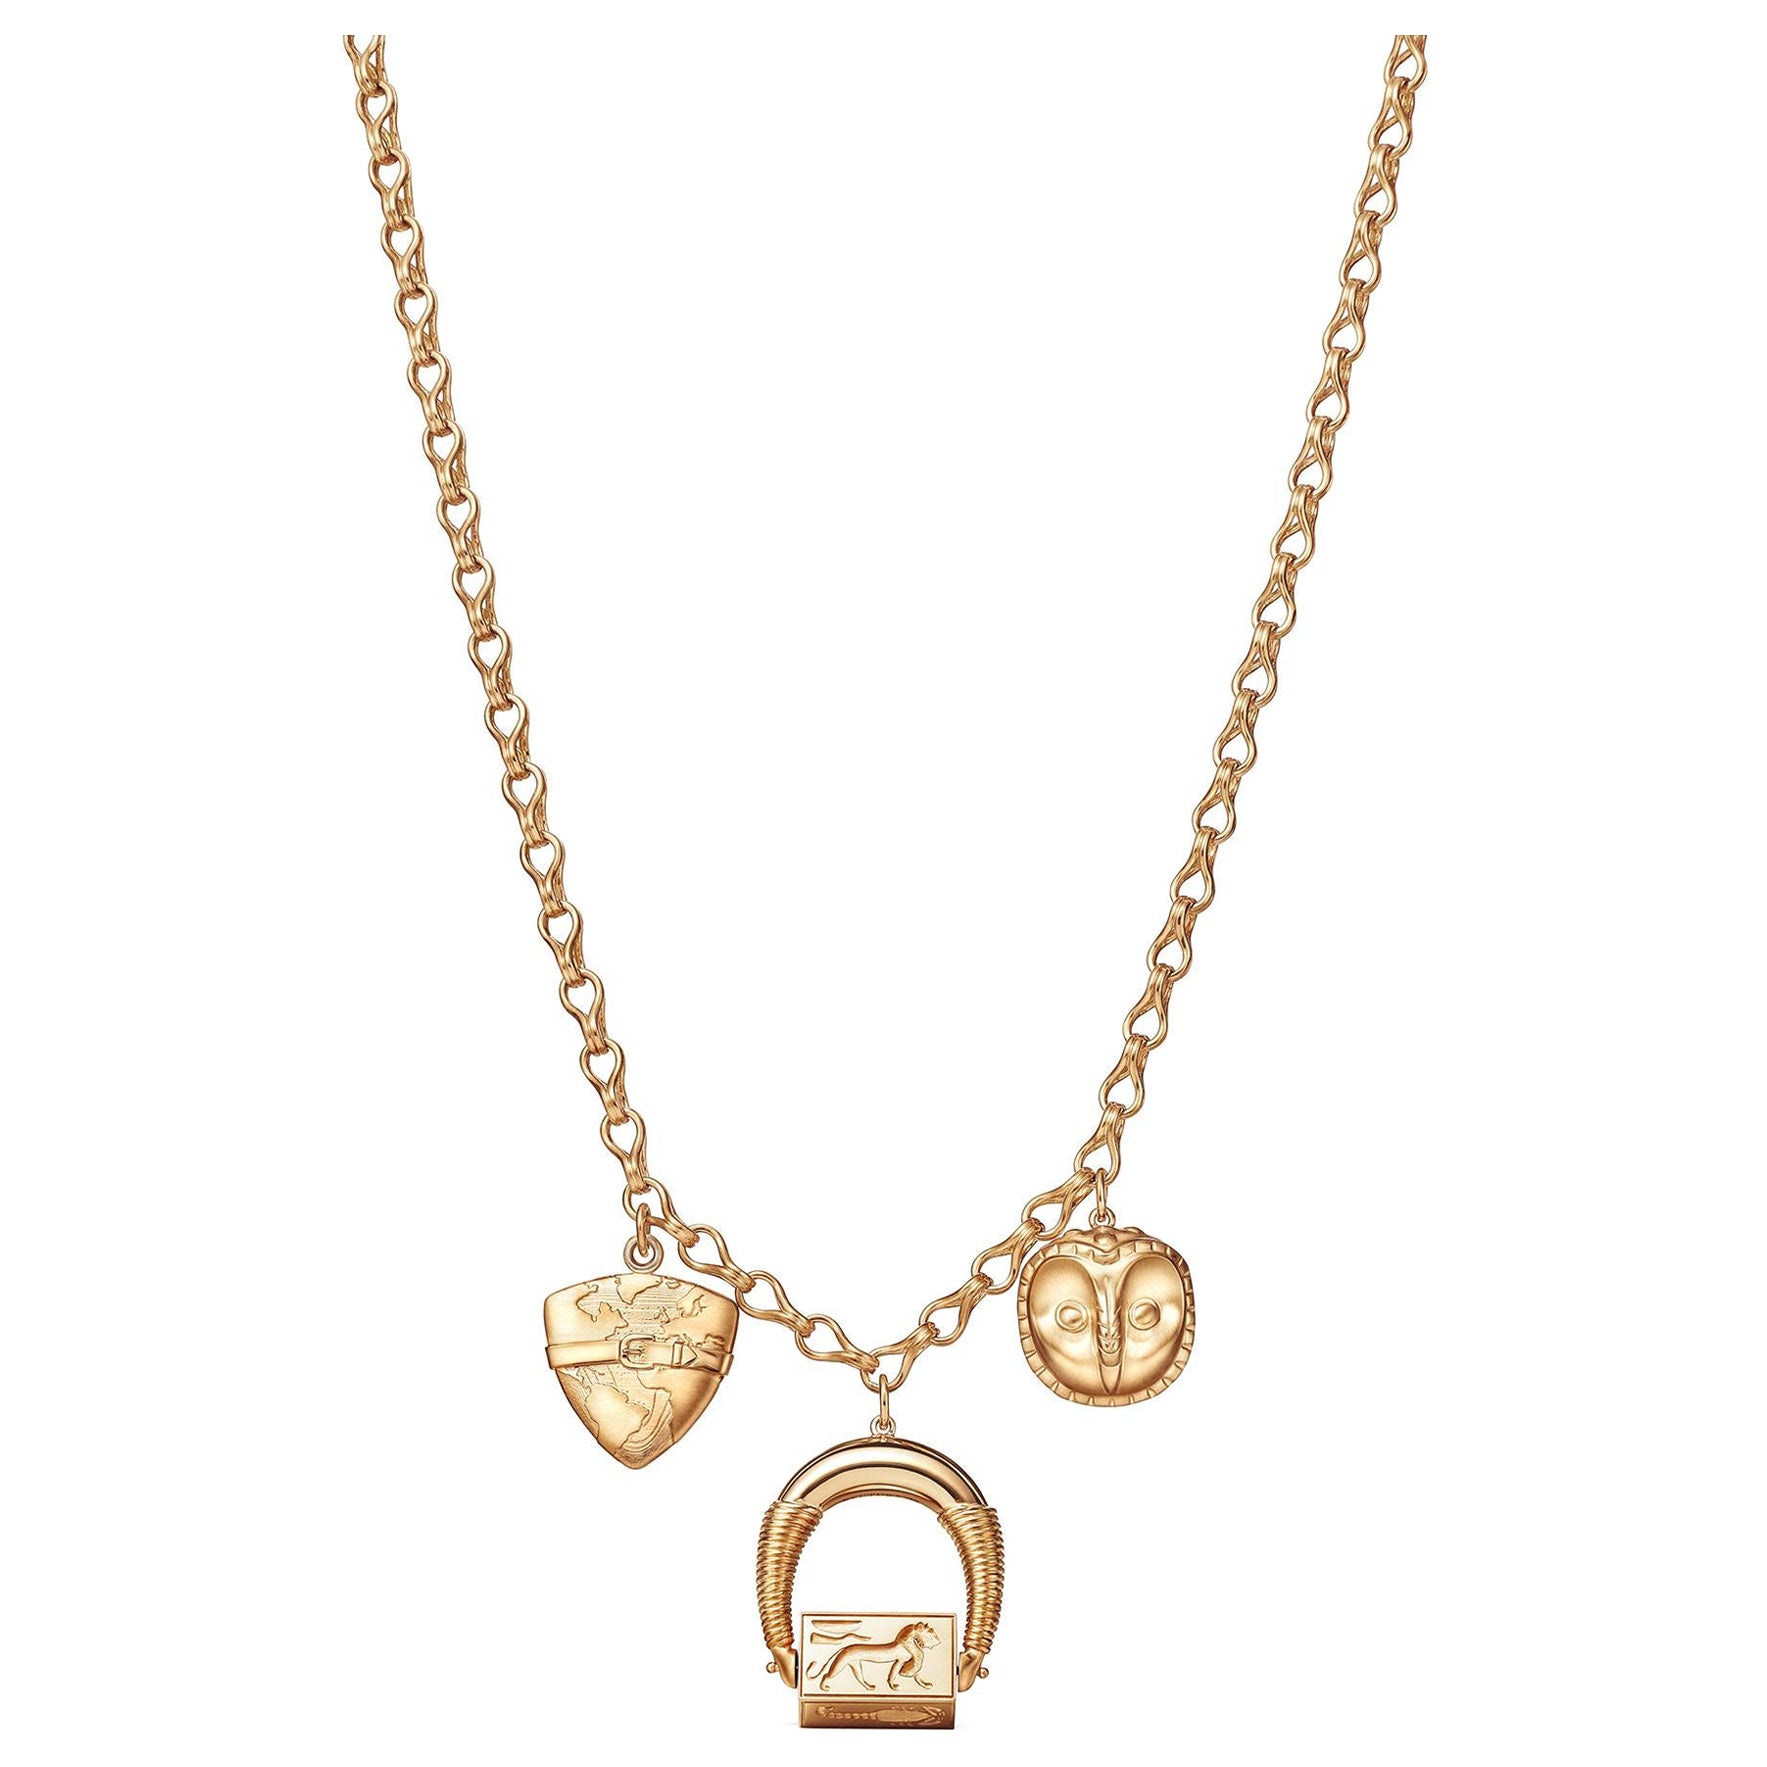 Amulet Egypt Greek Peruvian Charm Necklace 18k Fairmined Ecological Yellow Gold For Sale